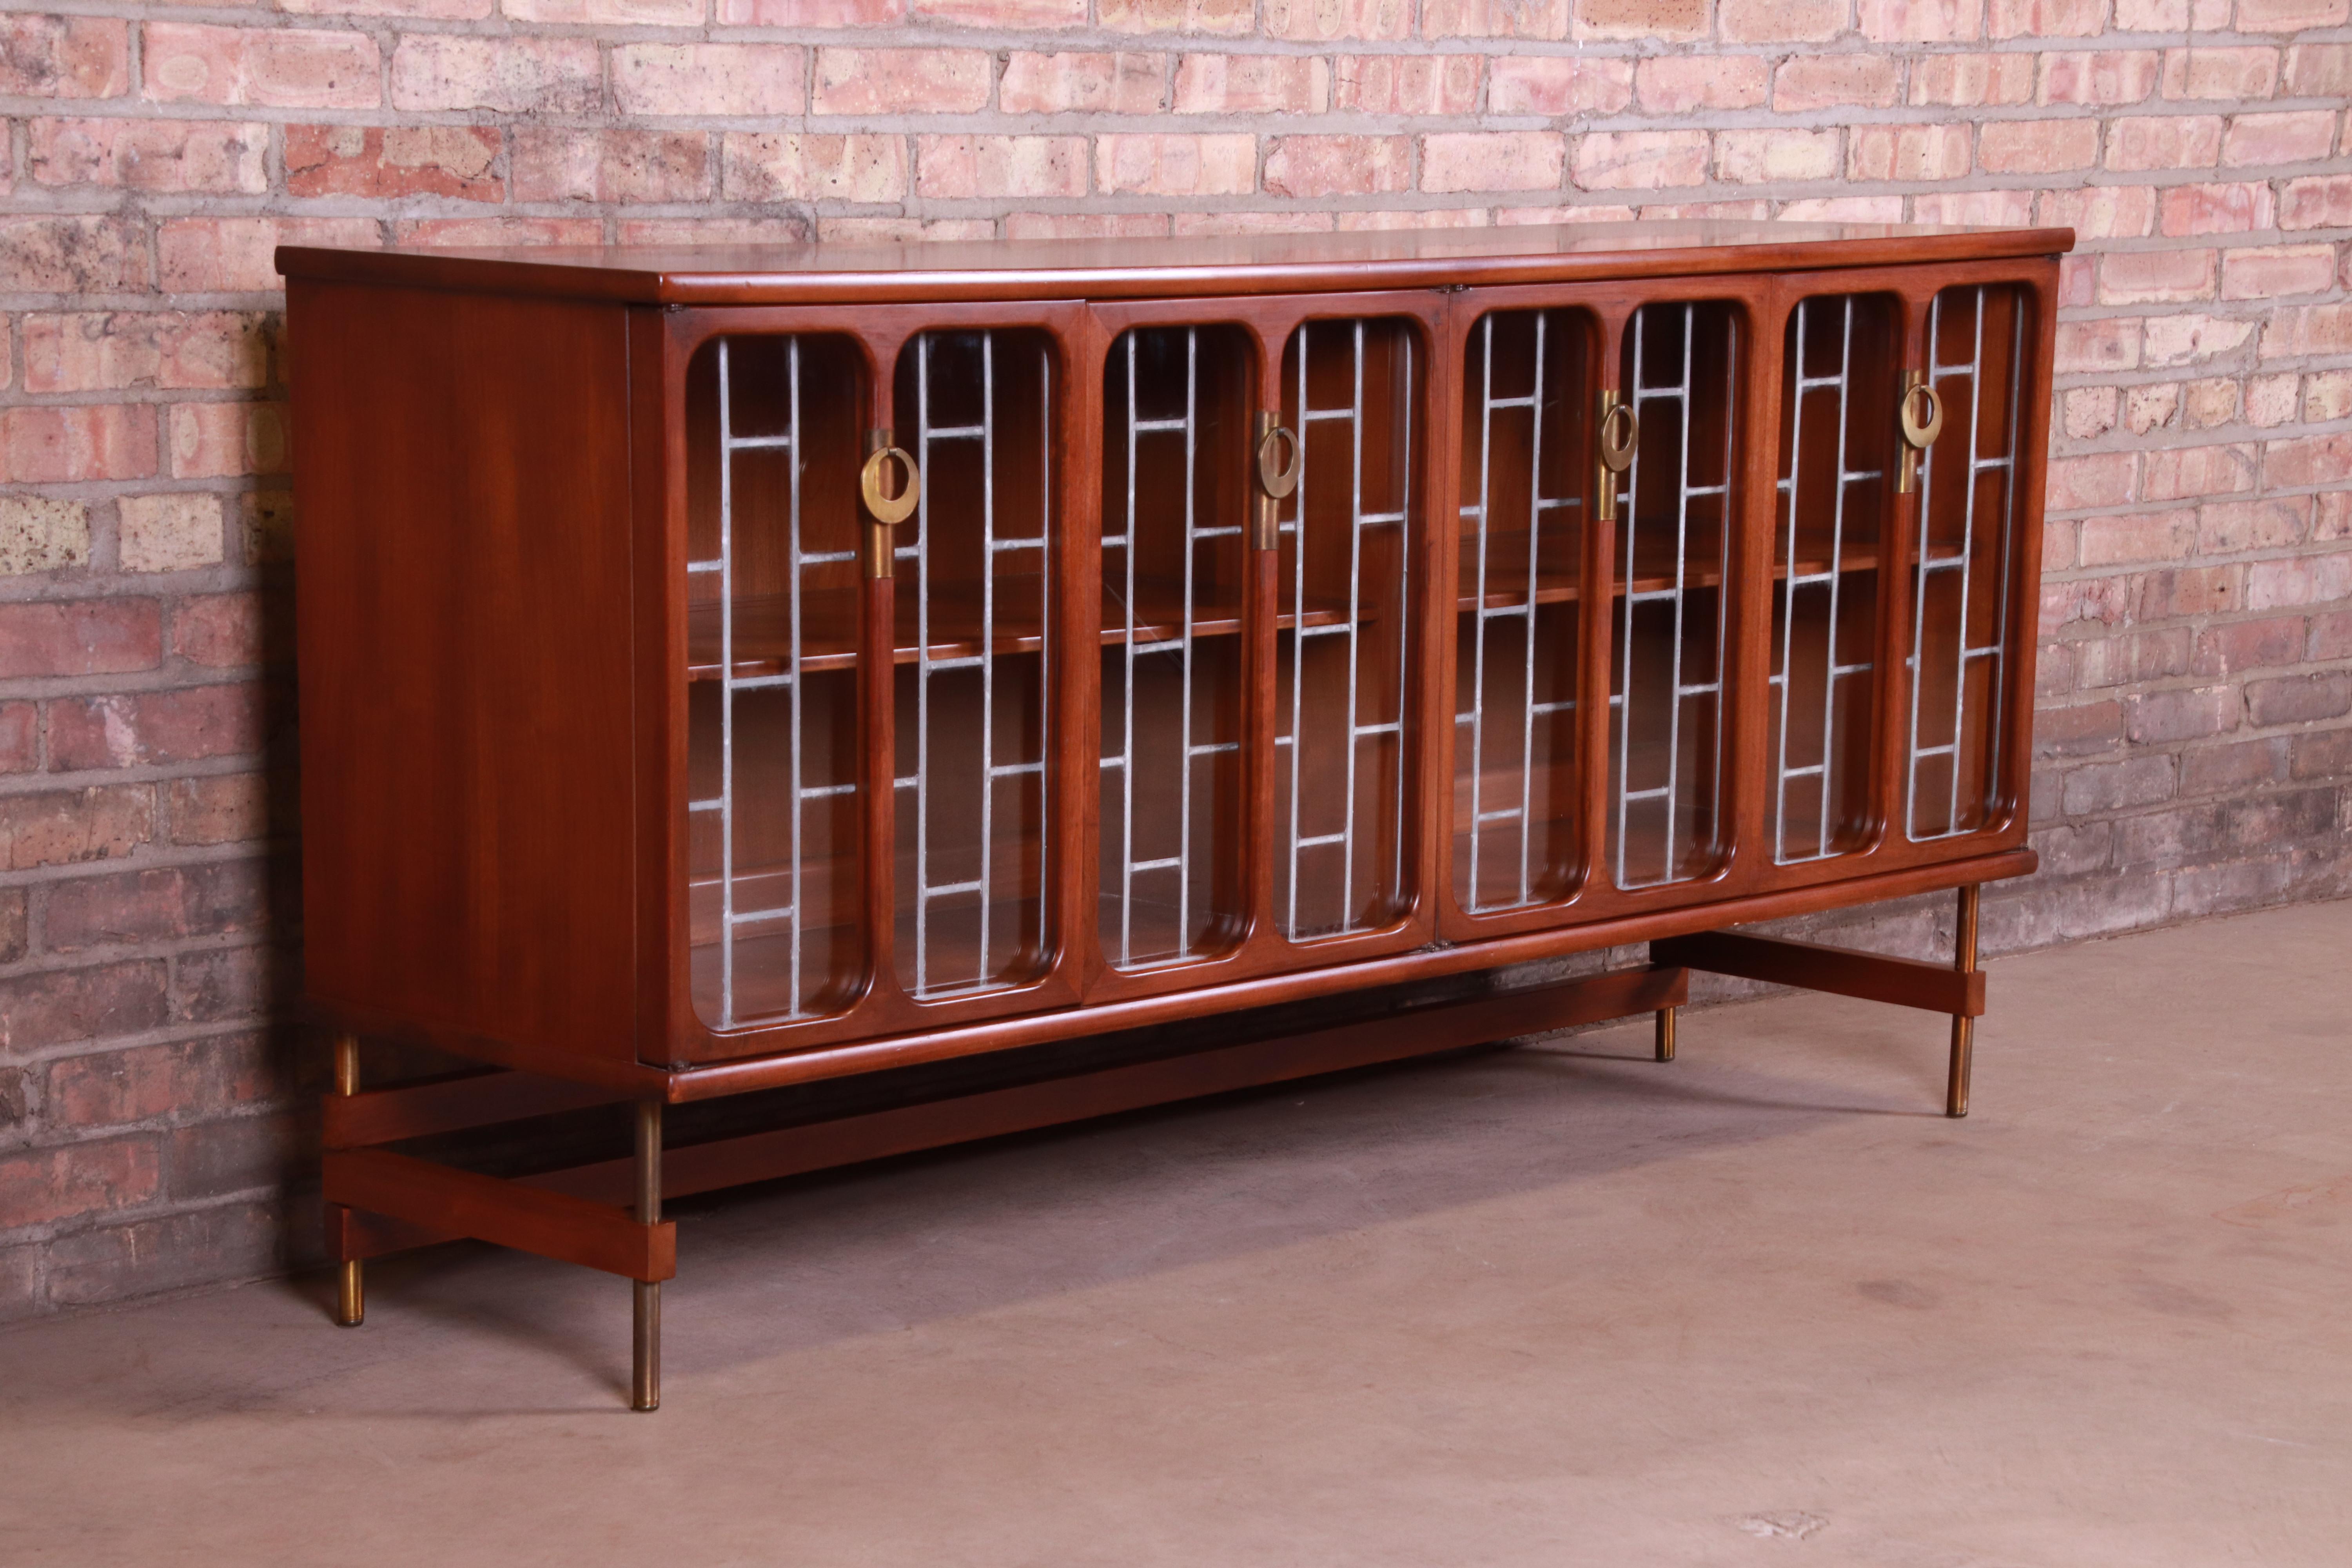 Mid-20th Century Mid-Century Modern Walnut Leaded Glass Bookcase by White Furniture, circa 1960s